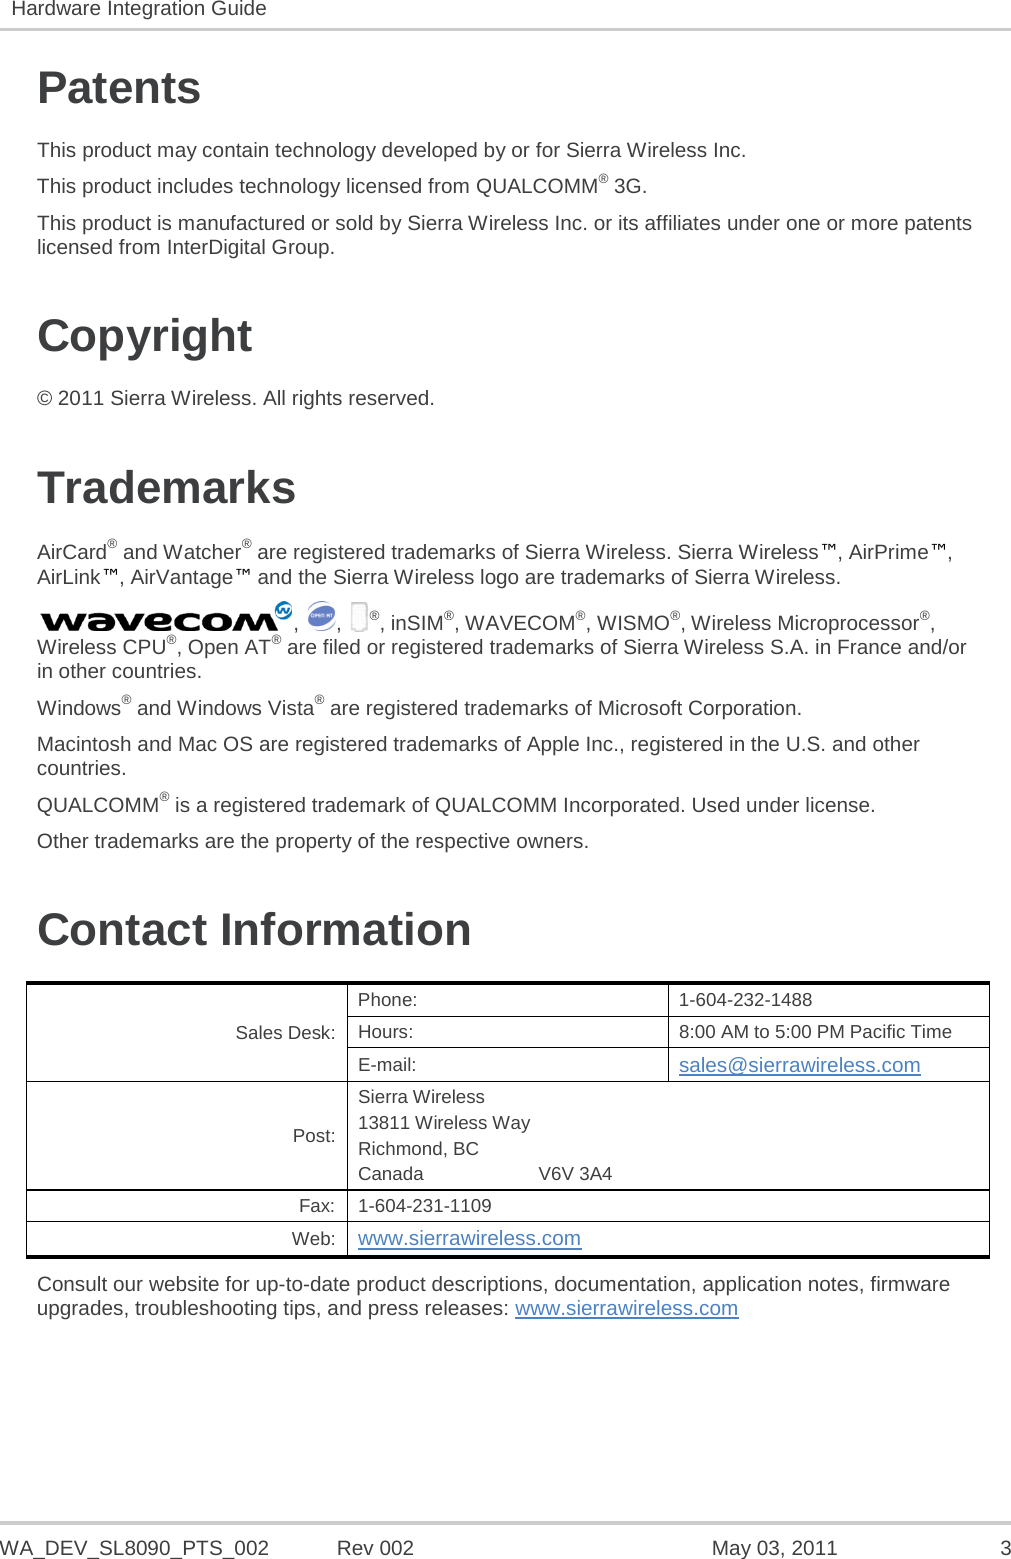   WA_DEV_SL8090_PTS_002 Rev 002  May 03, 2011  3 Hardware Integration Guide   Patents This product may contain technology developed by or for Sierra Wireless Inc. This product includes technology licensed from QUALCOMM® 3G. This product is manufactured or sold by Sierra Wireless Inc. or its affiliates under one or more patents licensed from InterDigital Group. Copyright © 2011 Sierra Wireless. All rights reserved. Trademarks AirCard® and Watcher® are registered trademarks of Sierra Wireless. Sierra Wireless™, AirPrime™, AirLink™, AirVantage™ and the Sierra Wireless logo are trademarks of Sierra Wireless. ,  ,  ®, inSIM®, WAVECOM®, WISMO®, Wireless Microprocessor®, Wireless CPU®, Open AT® are filed or registered trademarks of Sierra Wireless S.A. in France and/or in other countries. Windows® and Windows Vista® are registered trademarks of Microsoft Corporation. Macintosh and Mac OS are registered trademarks of Apple Inc., registered in the U.S. and other countries. QUALCOMM® is a registered trademark of QUALCOMM Incorporated. Used under license. Other trademarks are the property of the respective owners. Contact Information Sales Desk: Phone:  1-604-232-1488 Hours: 8:00 AM to 5:00 PM Pacific Time E-mail: sales@sierrawireless.com Post: Sierra Wireless 13811 Wireless Way Richmond, BC Canada                      V6V 3A4 Fax:  1-604-231-1109 Web: www.sierrawireless.com Consult our website for up-to-date product descriptions, documentation, application notes, firmware upgrades, troubleshooting tips, and press releases: www.sierrawireless.com   